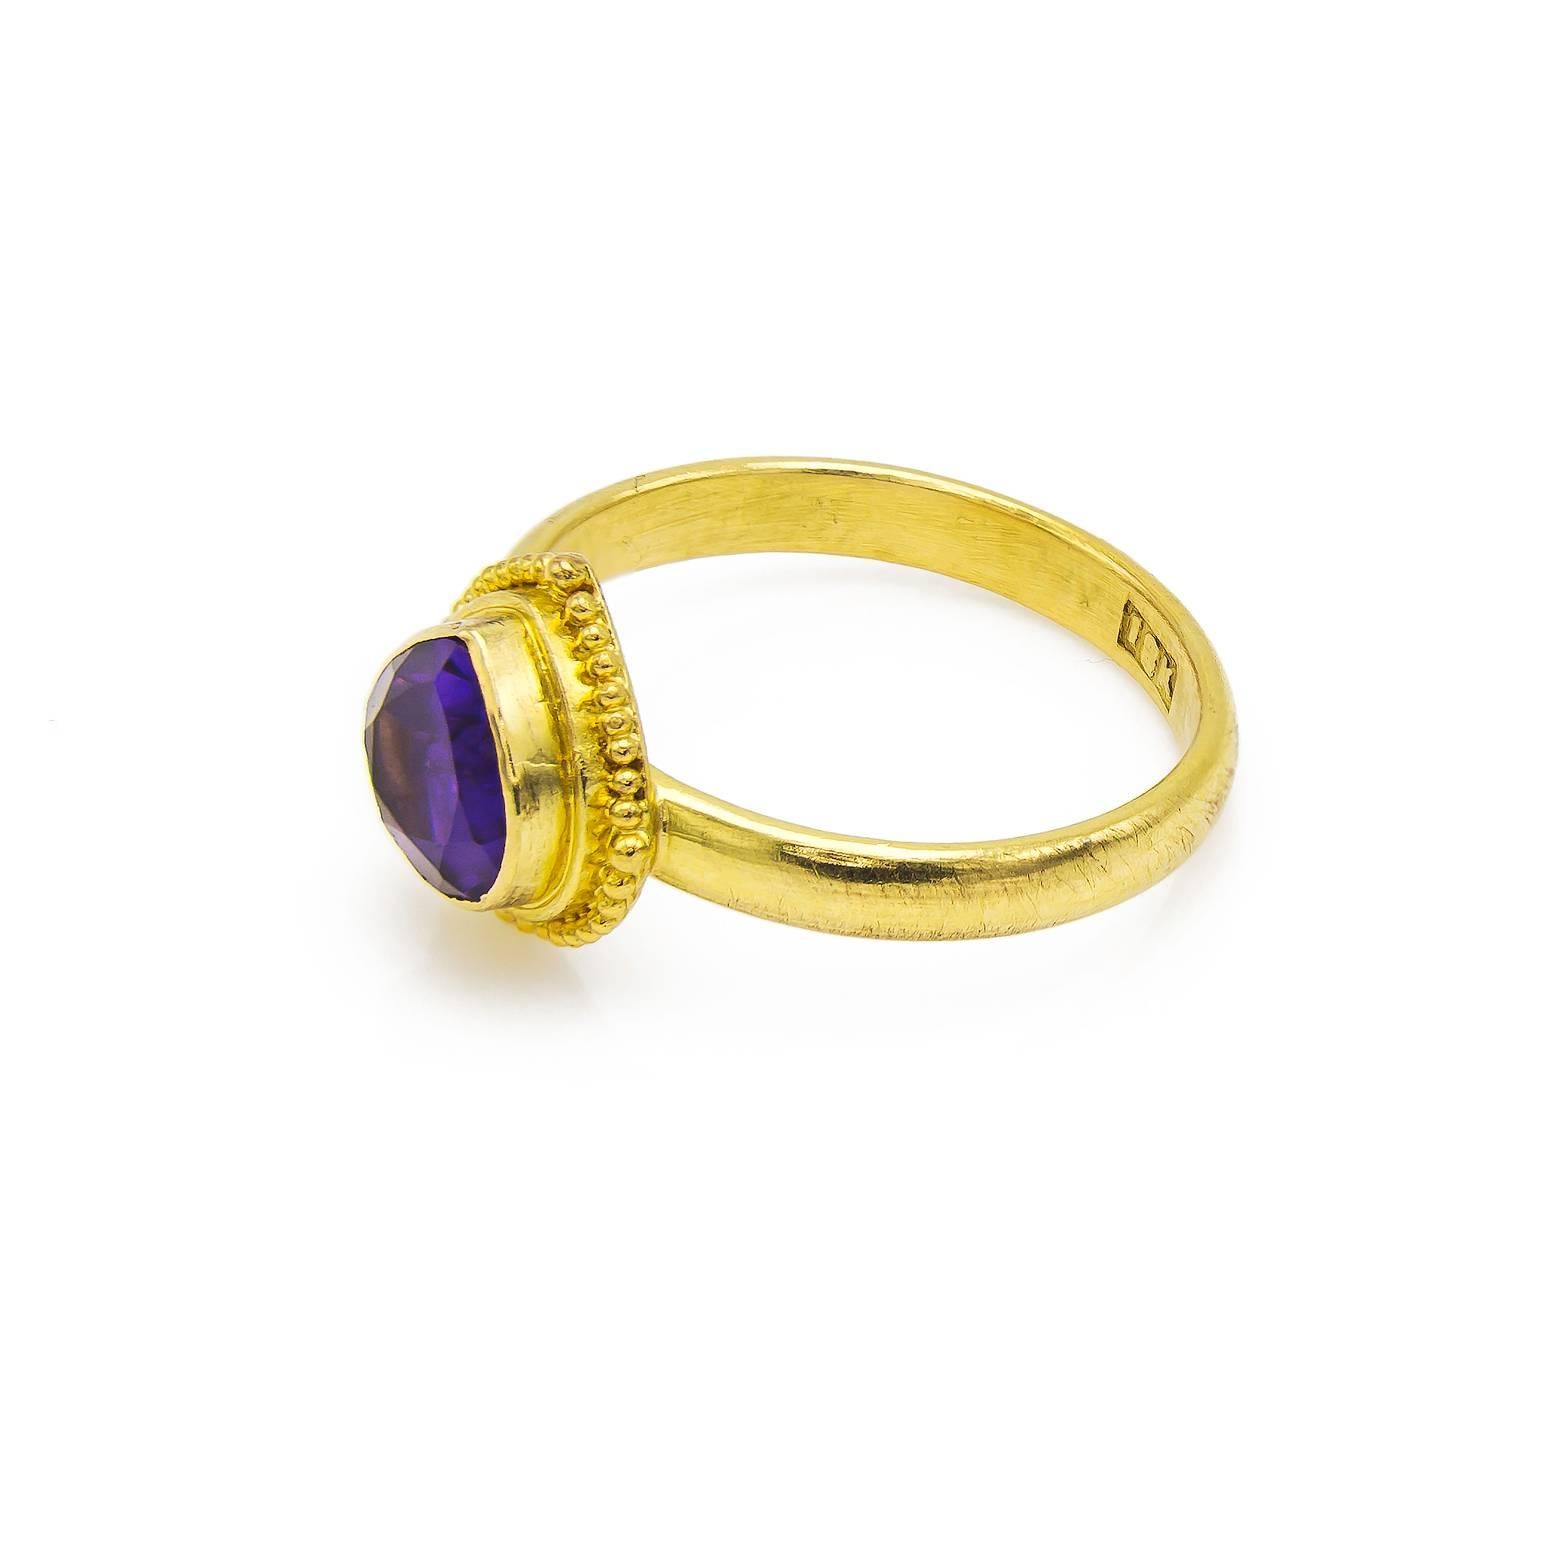 Pear Shaped Amethyst in Detailed Gold Bezel Ring 1